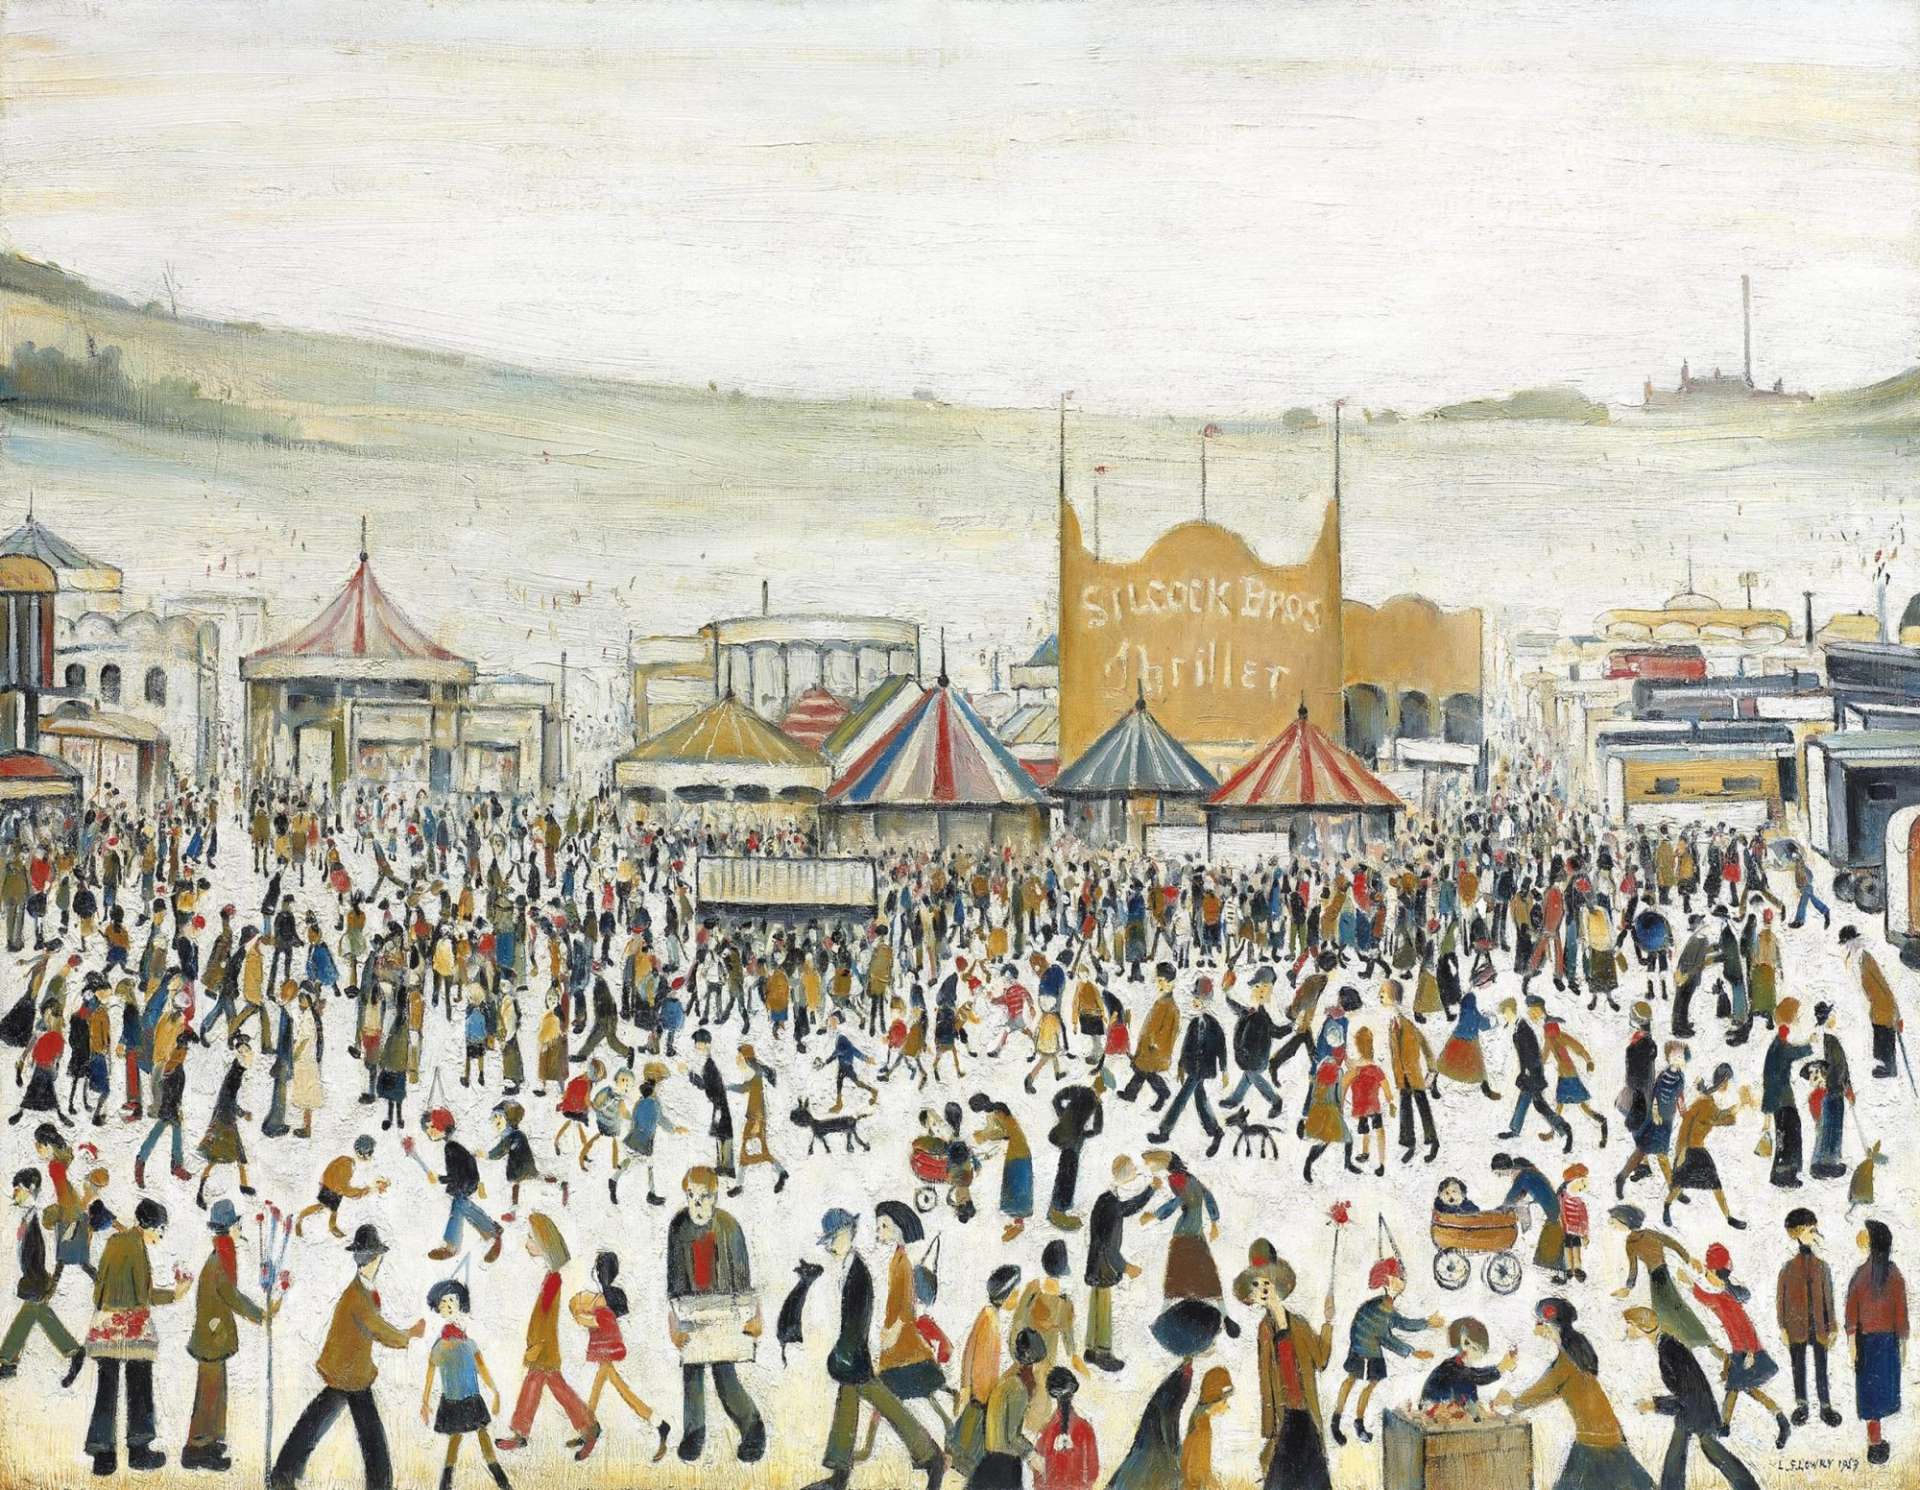 Fun Fair at Daisy Nook by L S Lowry